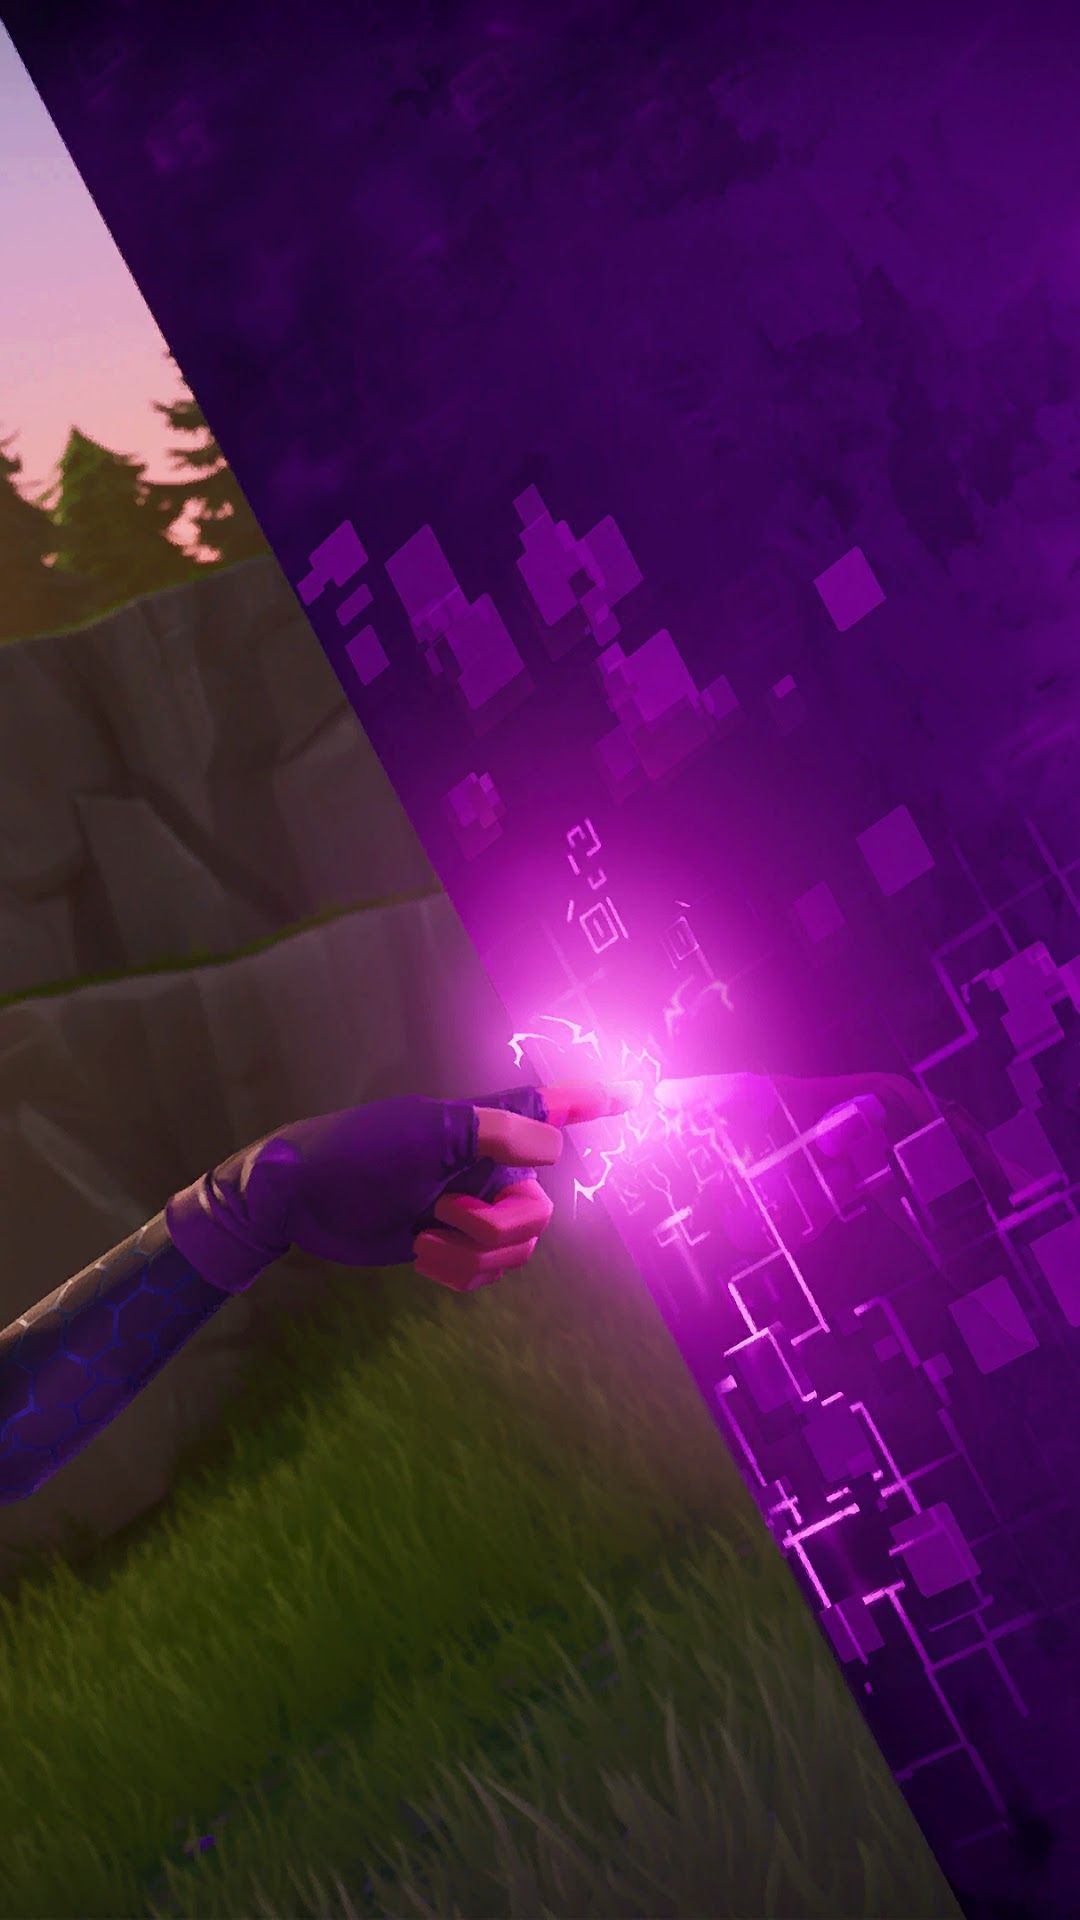 Fortnite Battle Royale, Brite Bomber, Dark Bomber phone HD Wallpaper, Image, Background, Photo and Picture